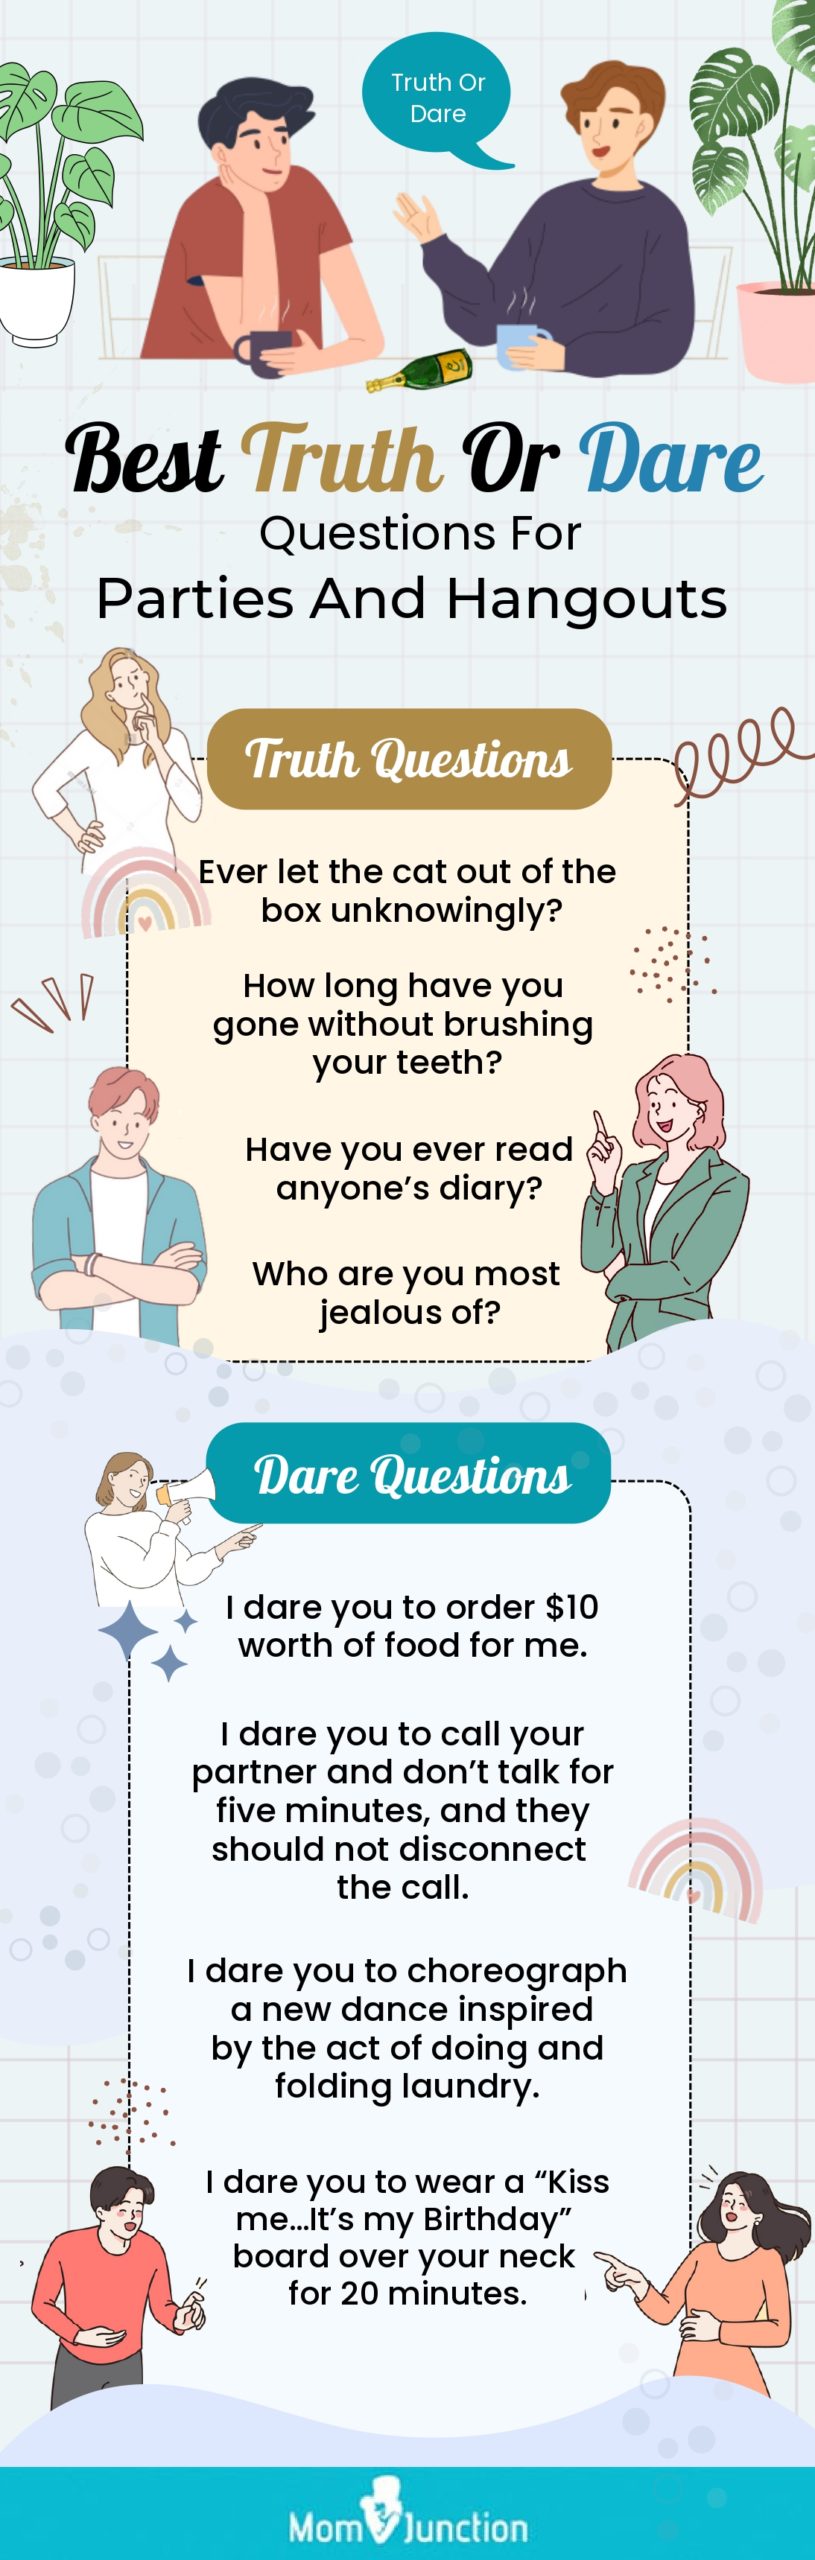 truth or dare questions for parties and hangouts (infographic)